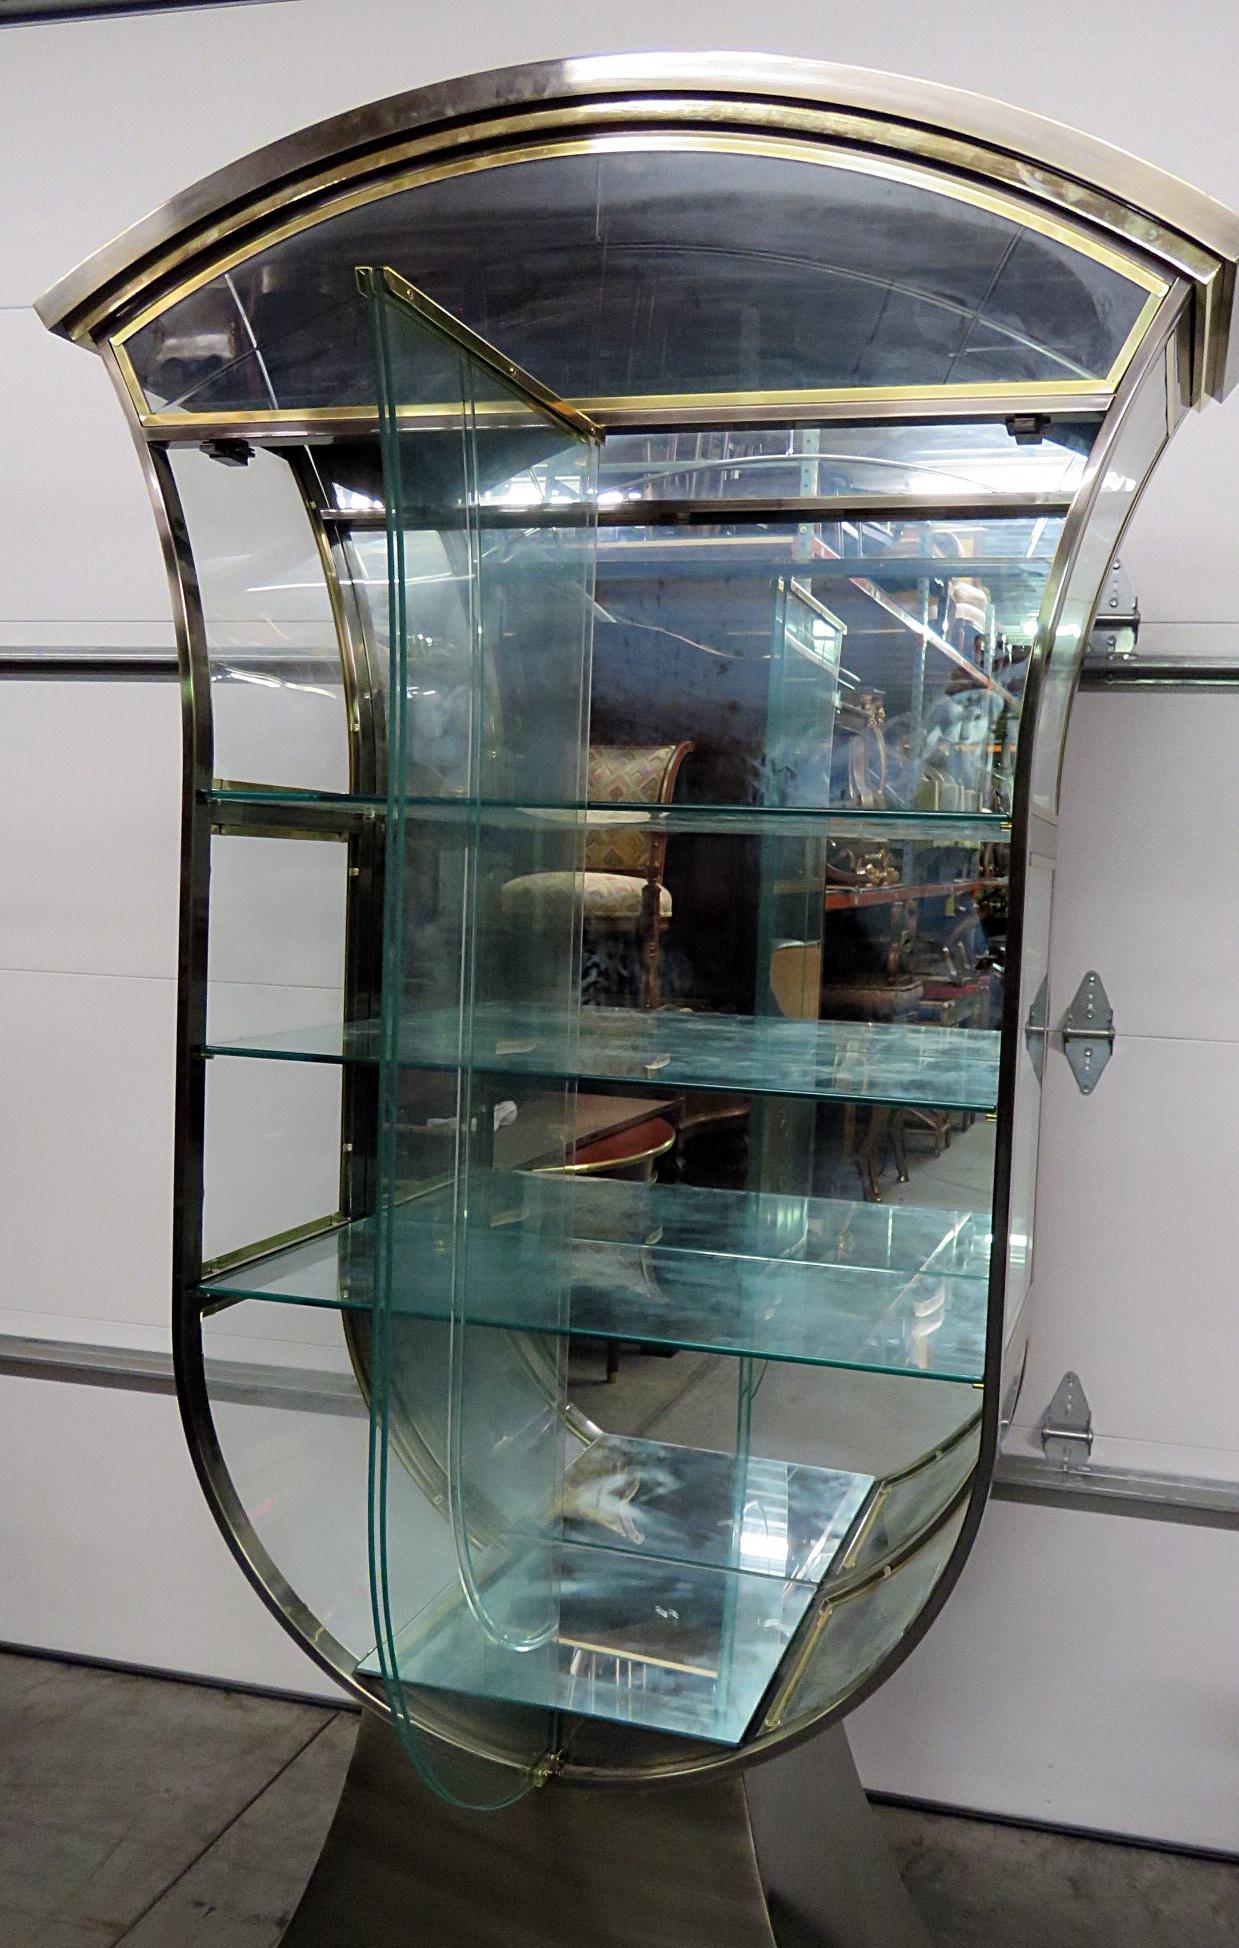 Mid-Century Modern Design Institute of America lighted display cabinet with 2 shelves.